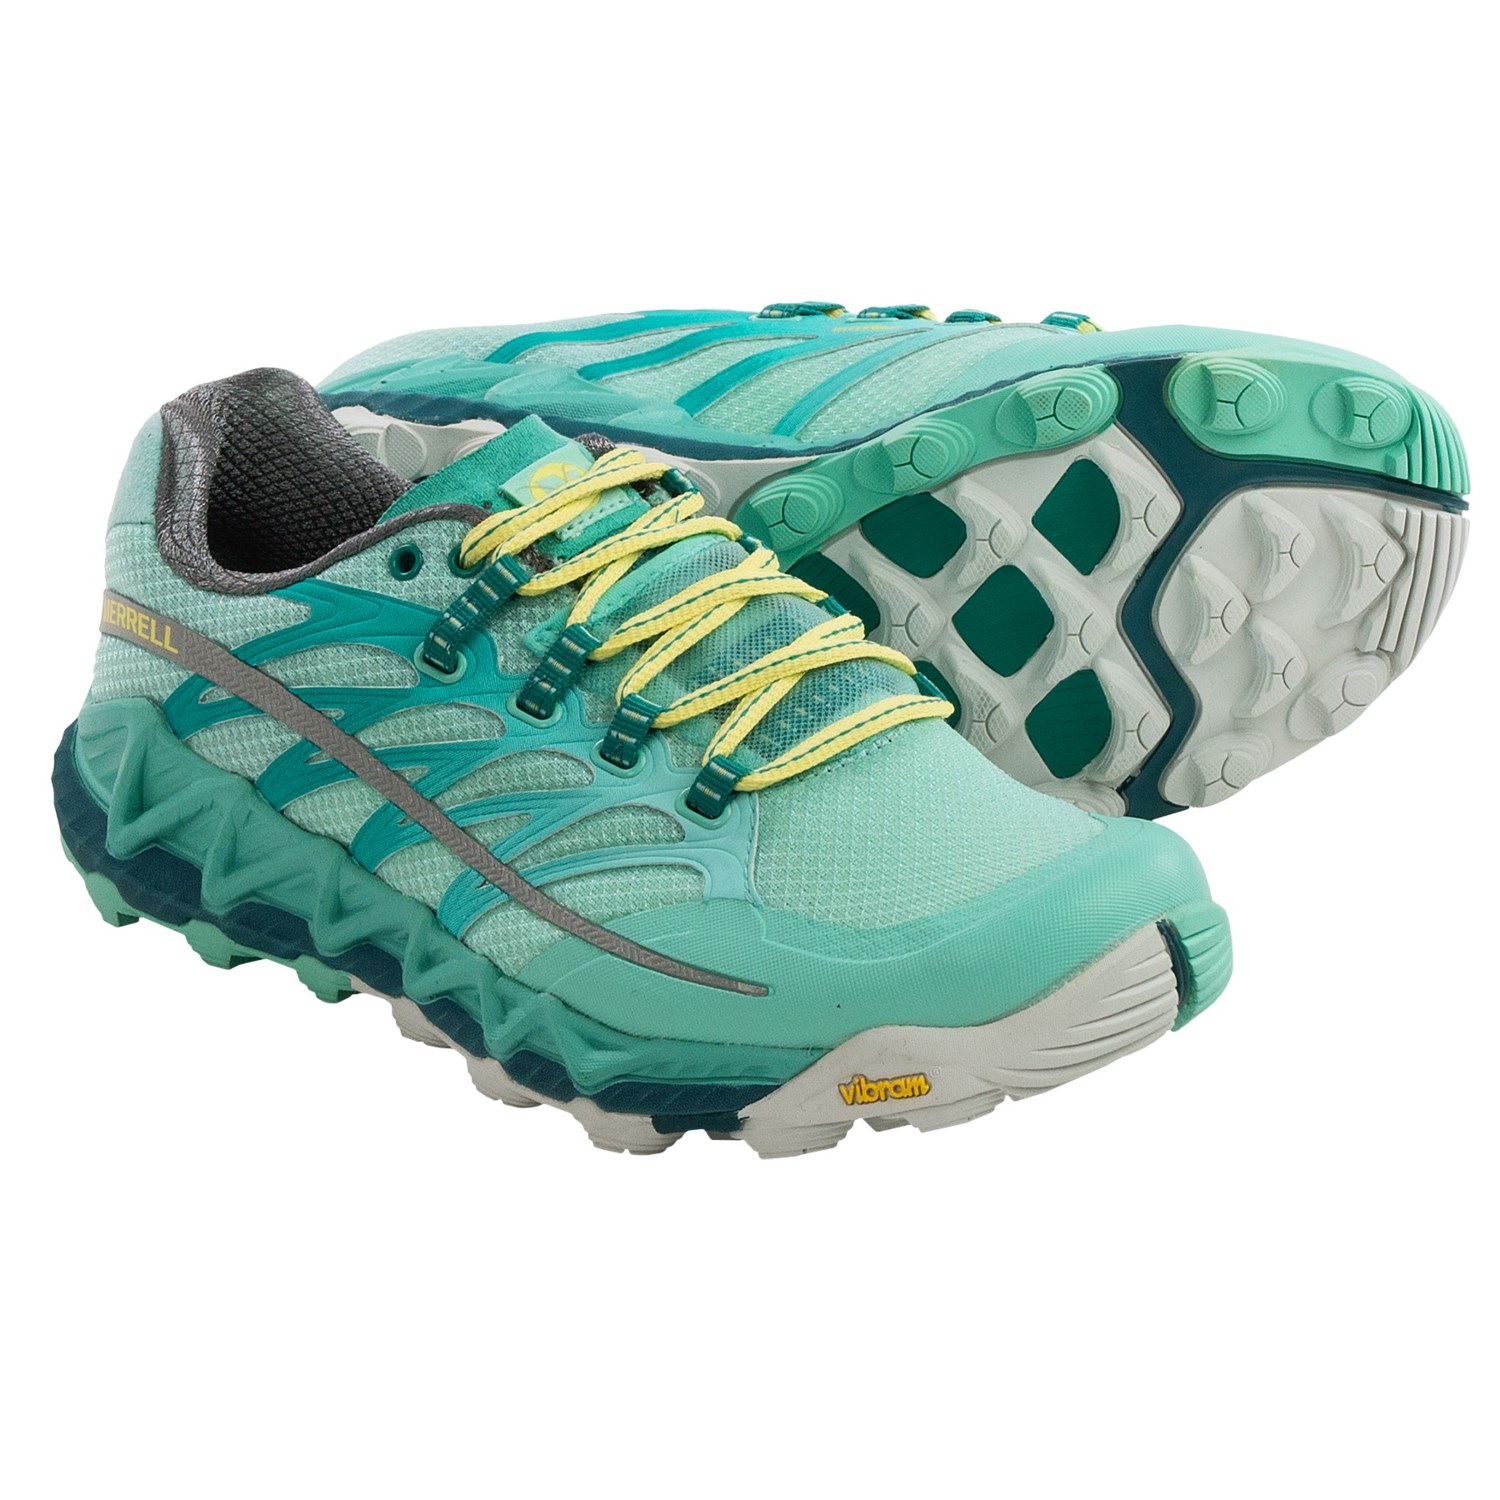 Merrell All Out Peak Trail Running Shoes (For Women) - Save 38%